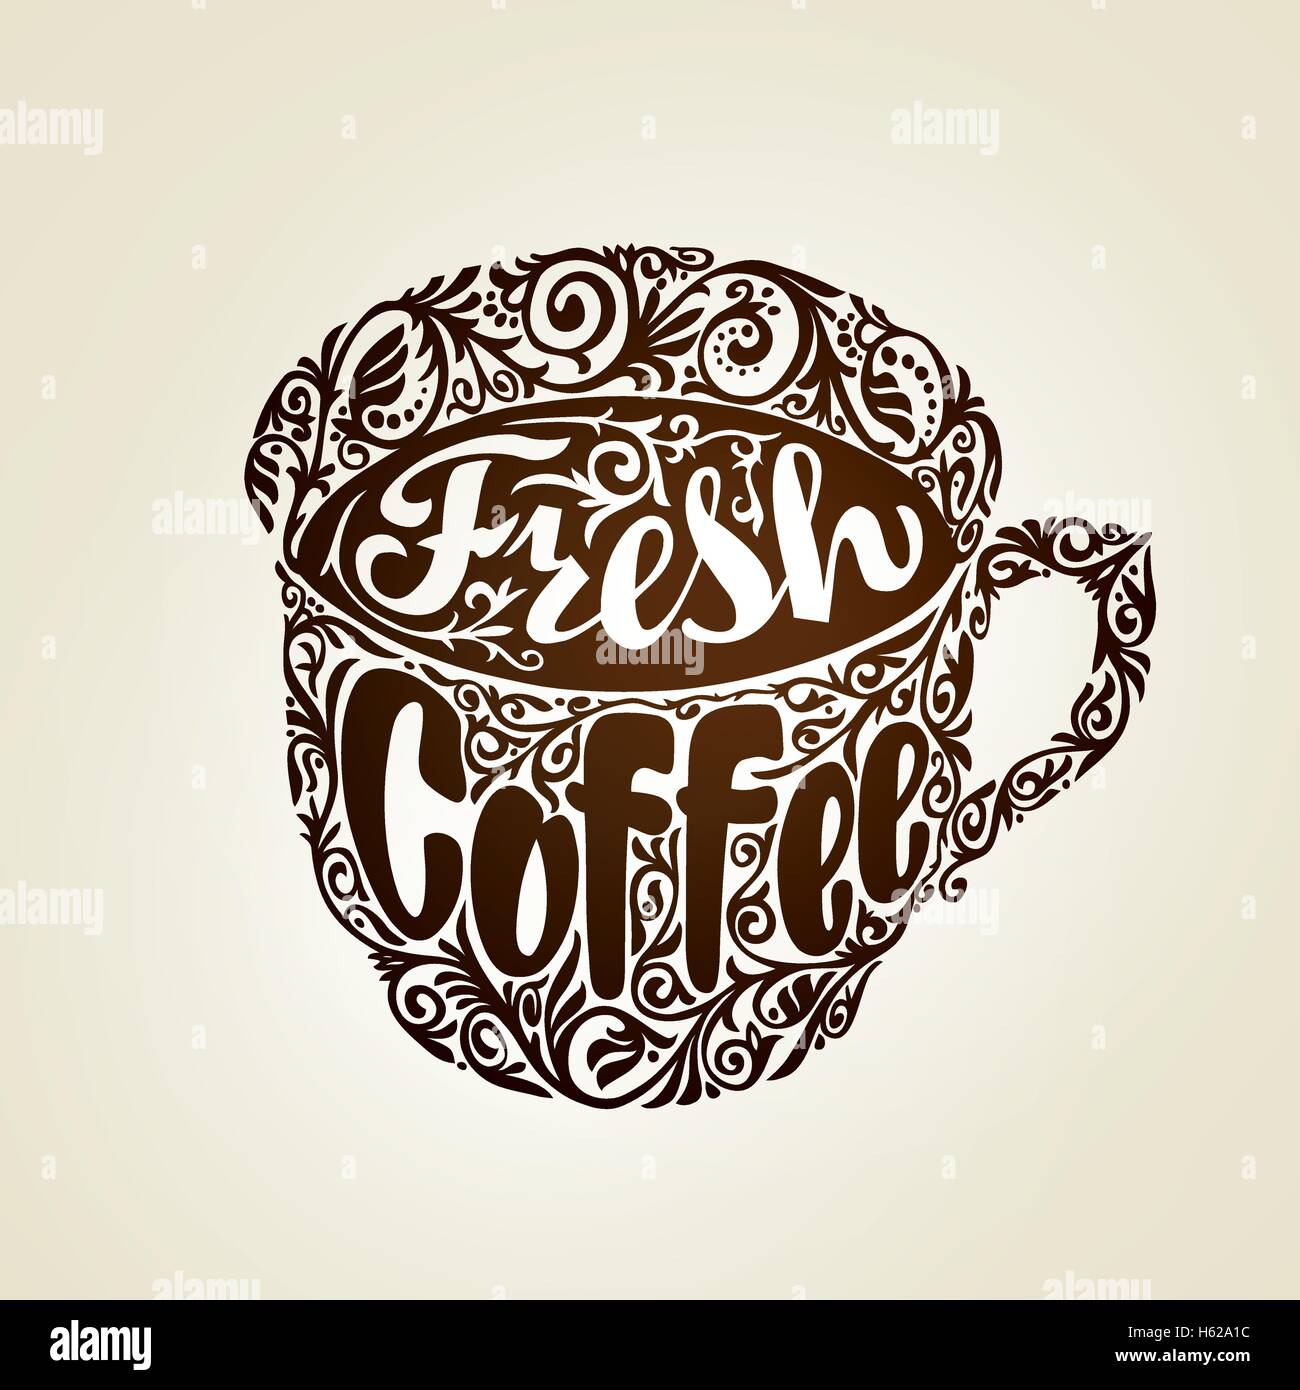 Fresh Coffee. Cup with decorative patterns. Vector illustration Stock Vector